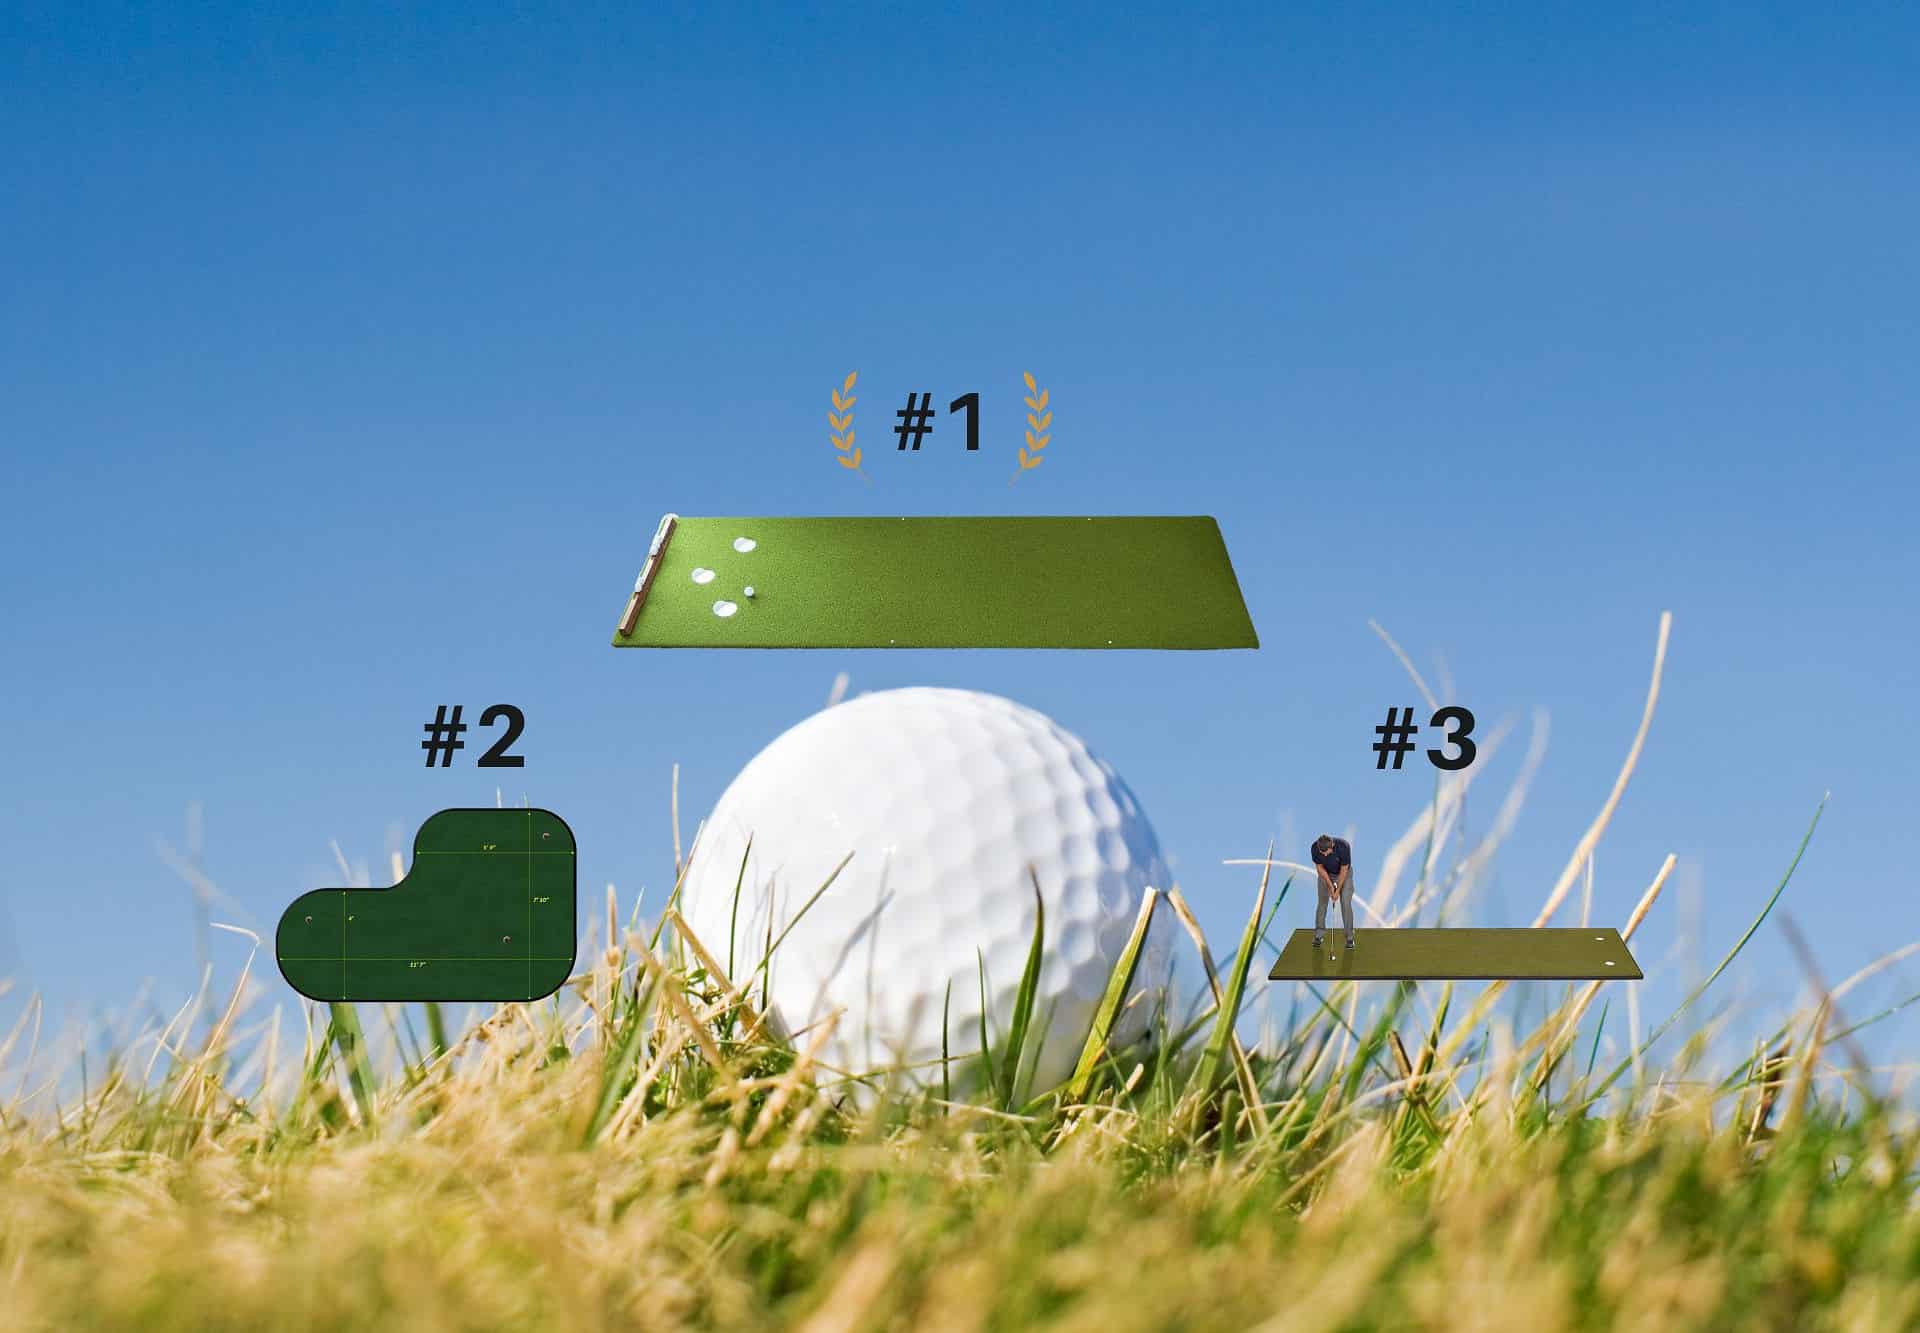 The 10 Best Putting Greens to Improve Your Golf Game